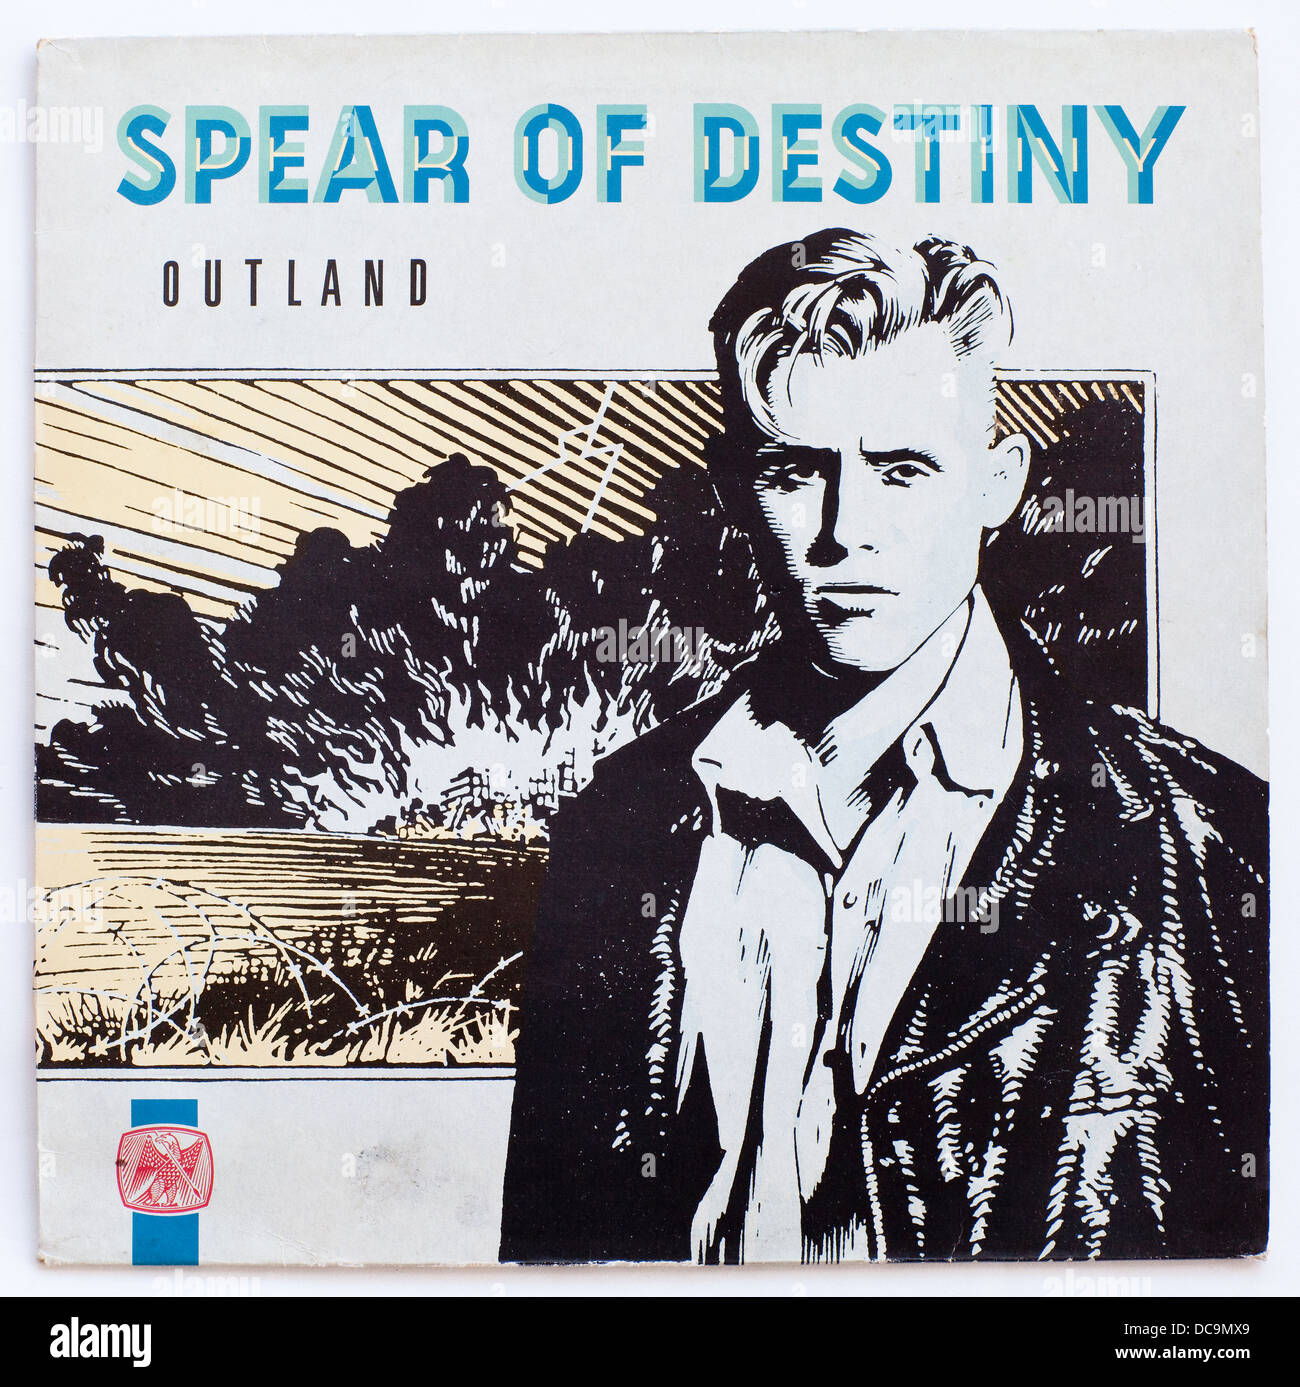 Spear of Destiny - Outland, 1987 album on Ten Records - Editorial use only Stock Photo